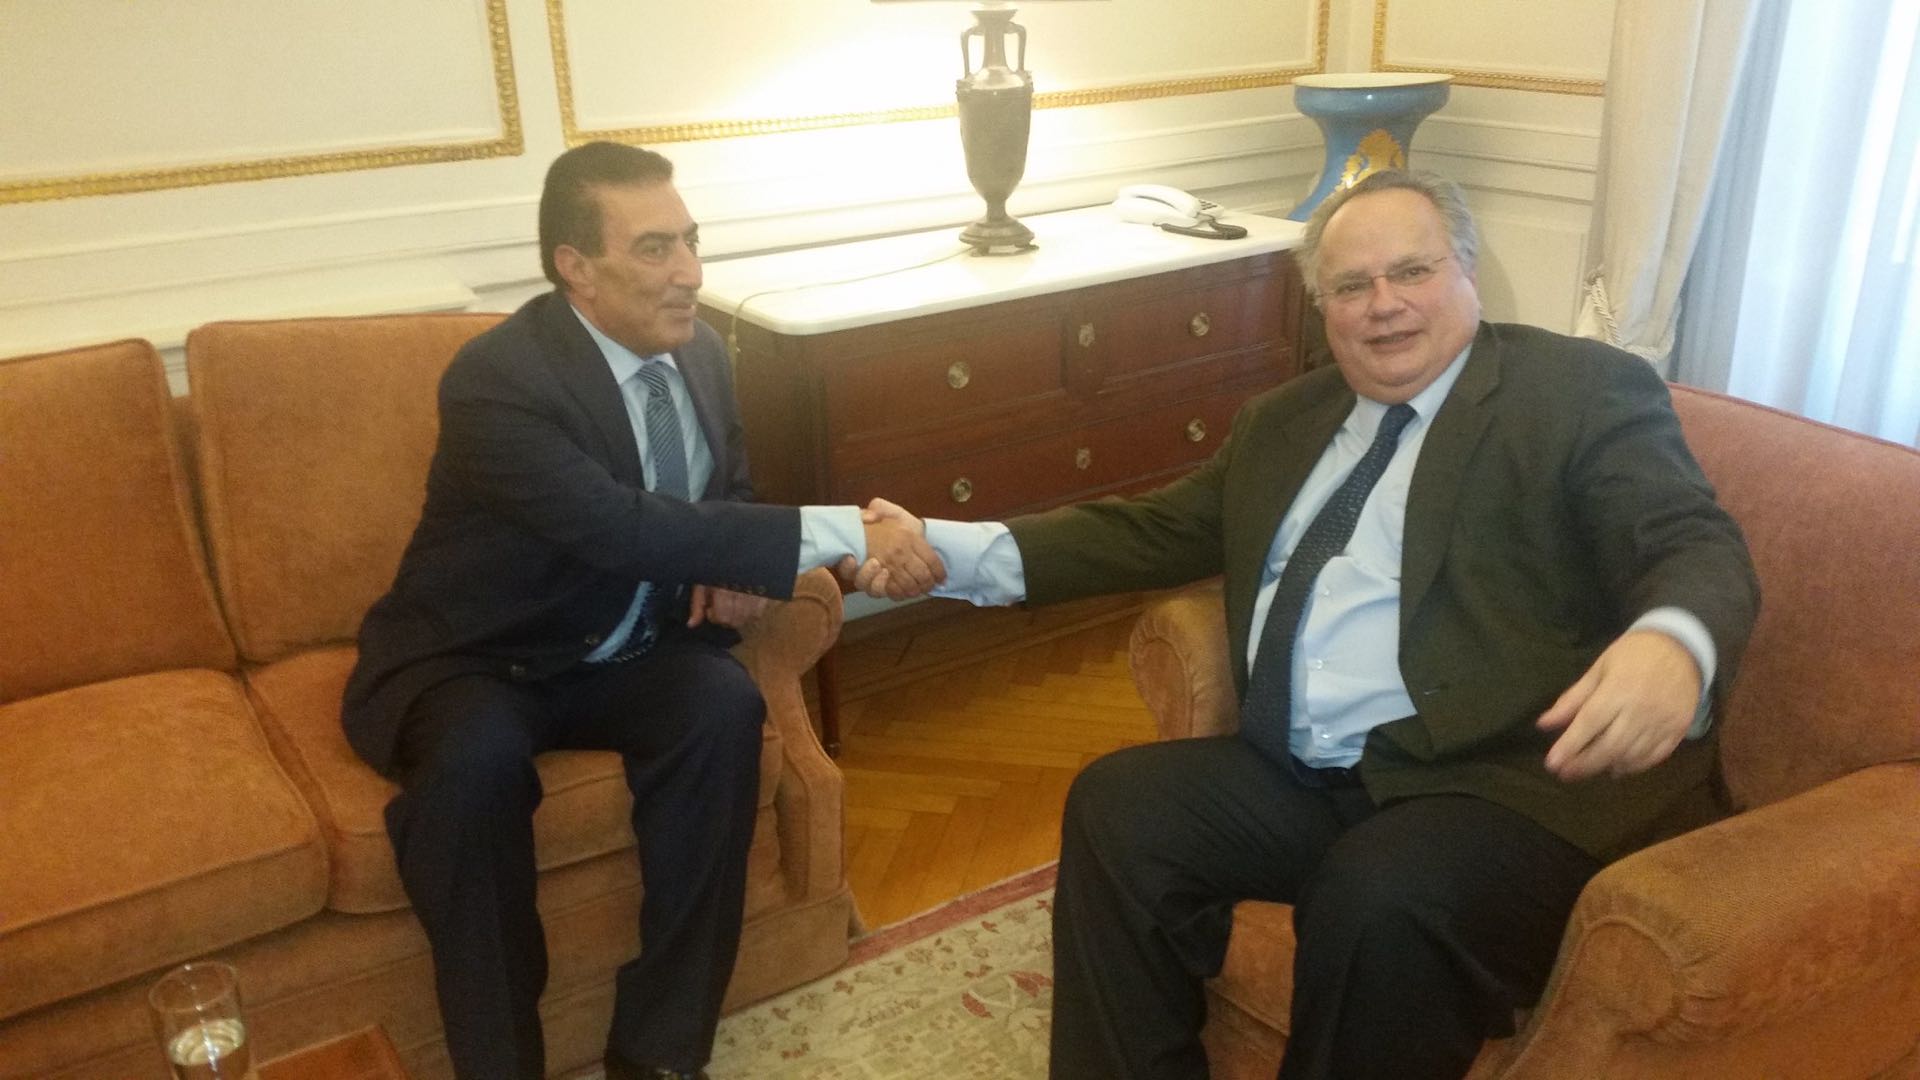 Atef Tarawneh, left, shakes hands with Greece’s then-Minister of Foreign Affairs Nikus Kotzias on March 3, 2016. Credit: Hellenic Ministry of Foreign Affairs